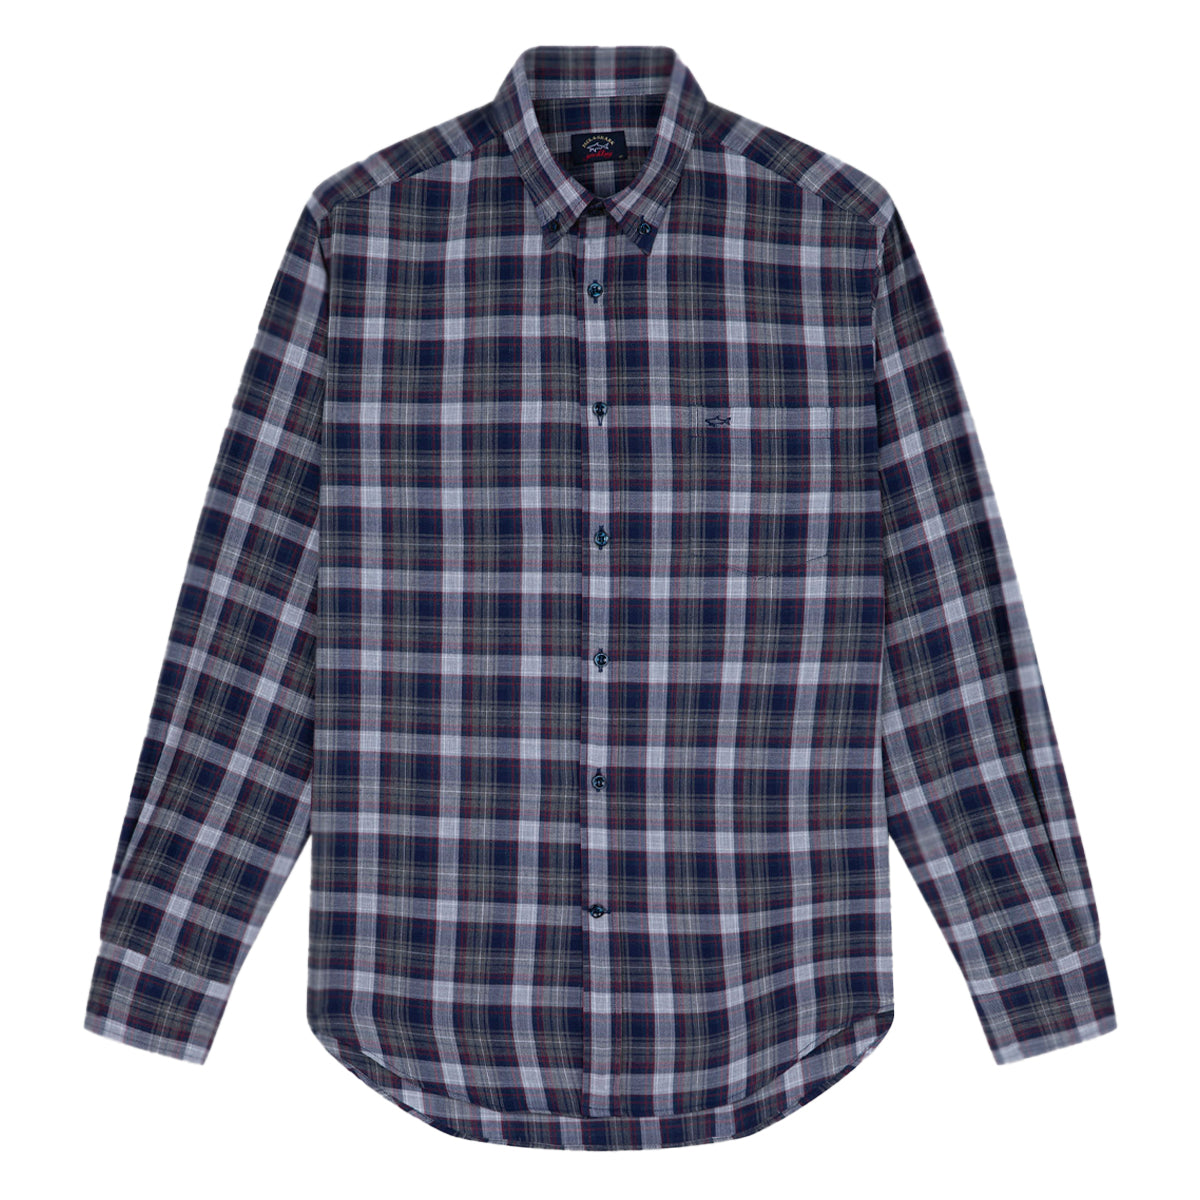 Charcoal & Red Check Cotton Flannel Shirt Long Sleeve Paul & Shark   